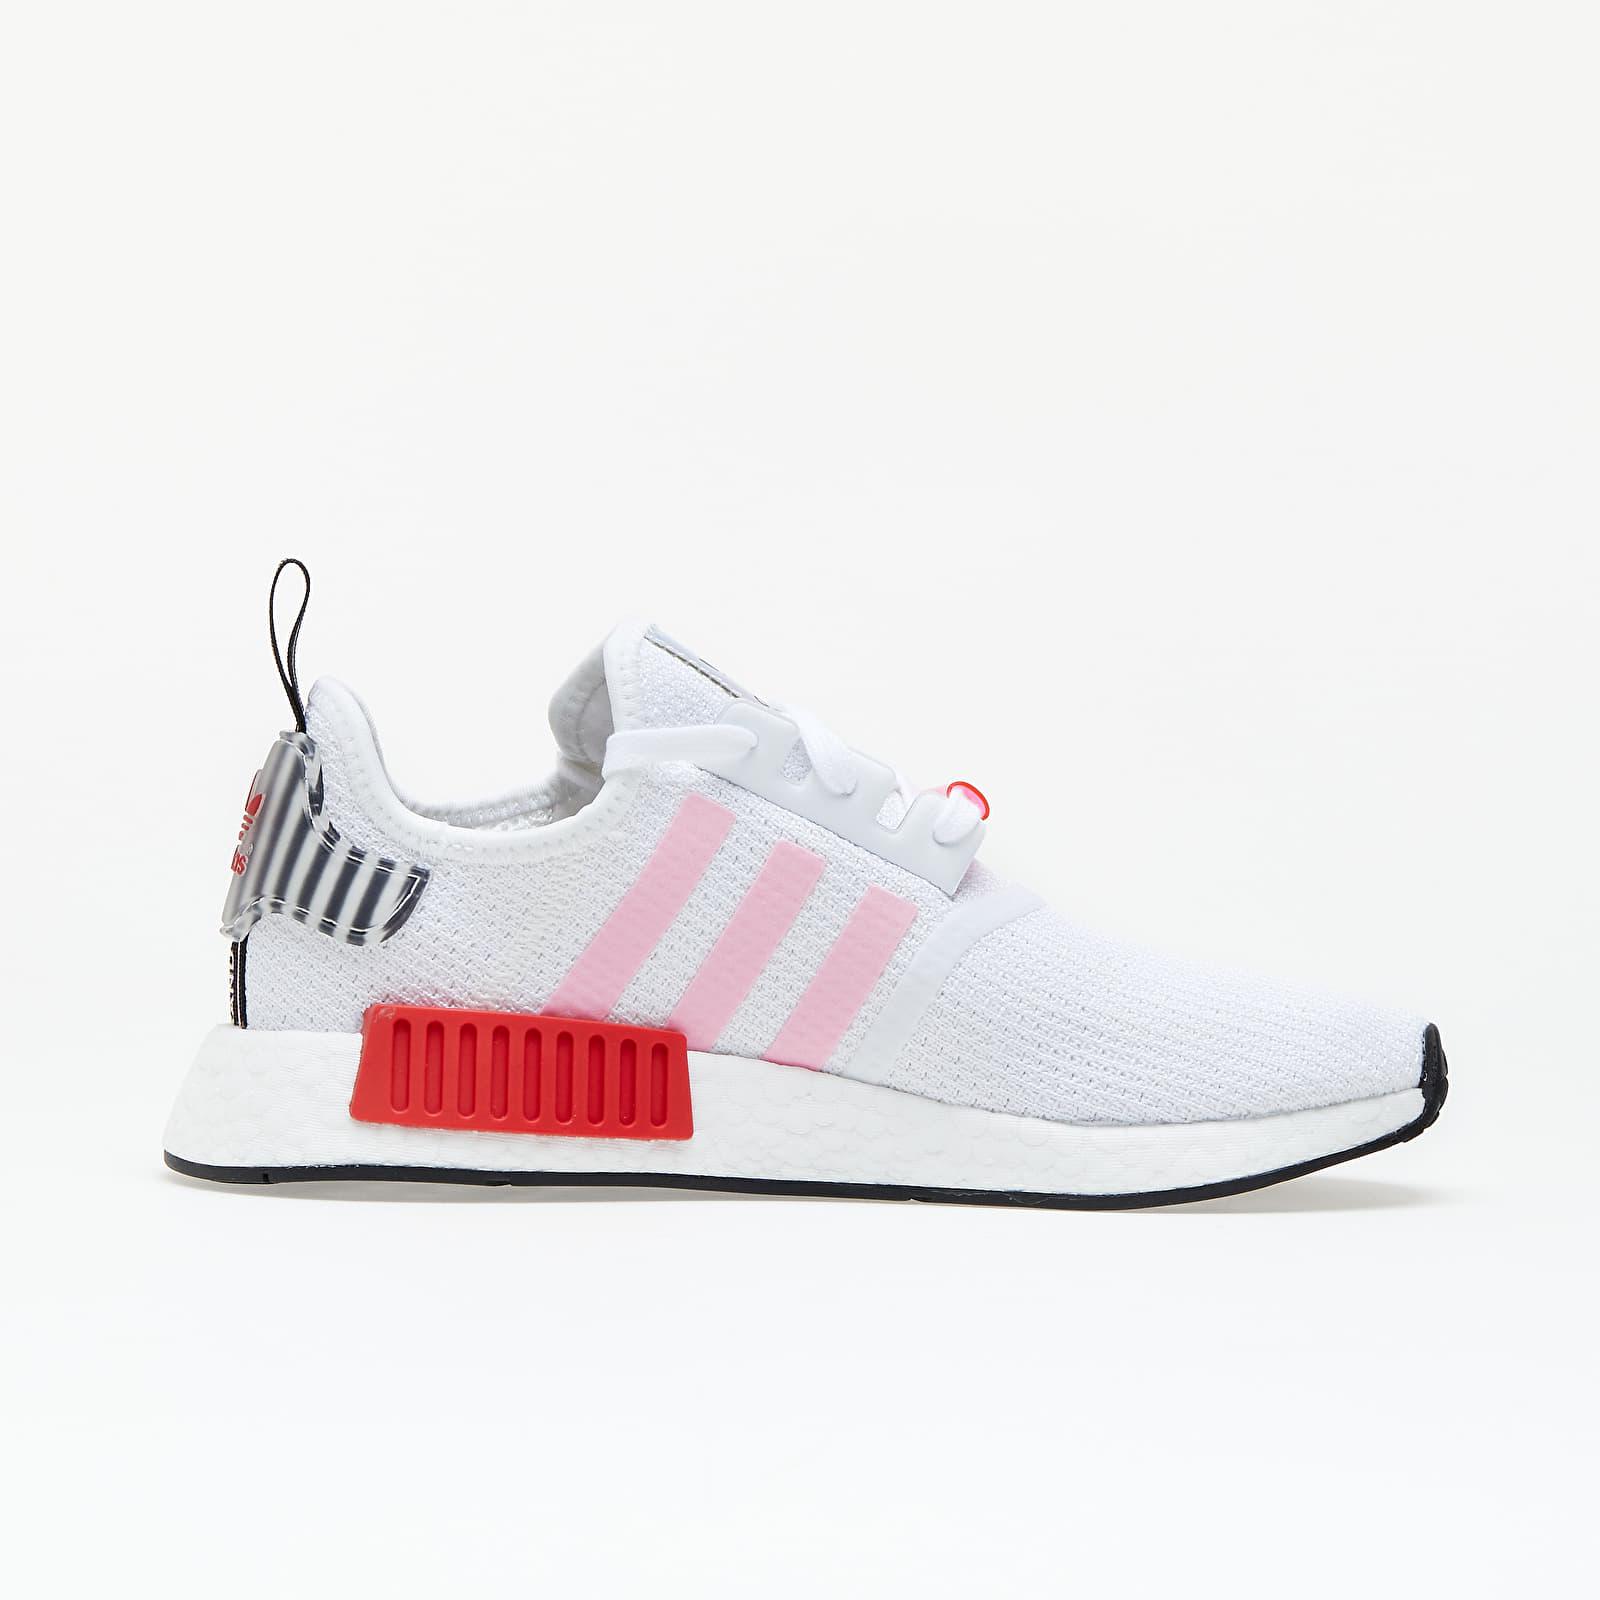 adidas originals nmd_r1 trainers in white and pink